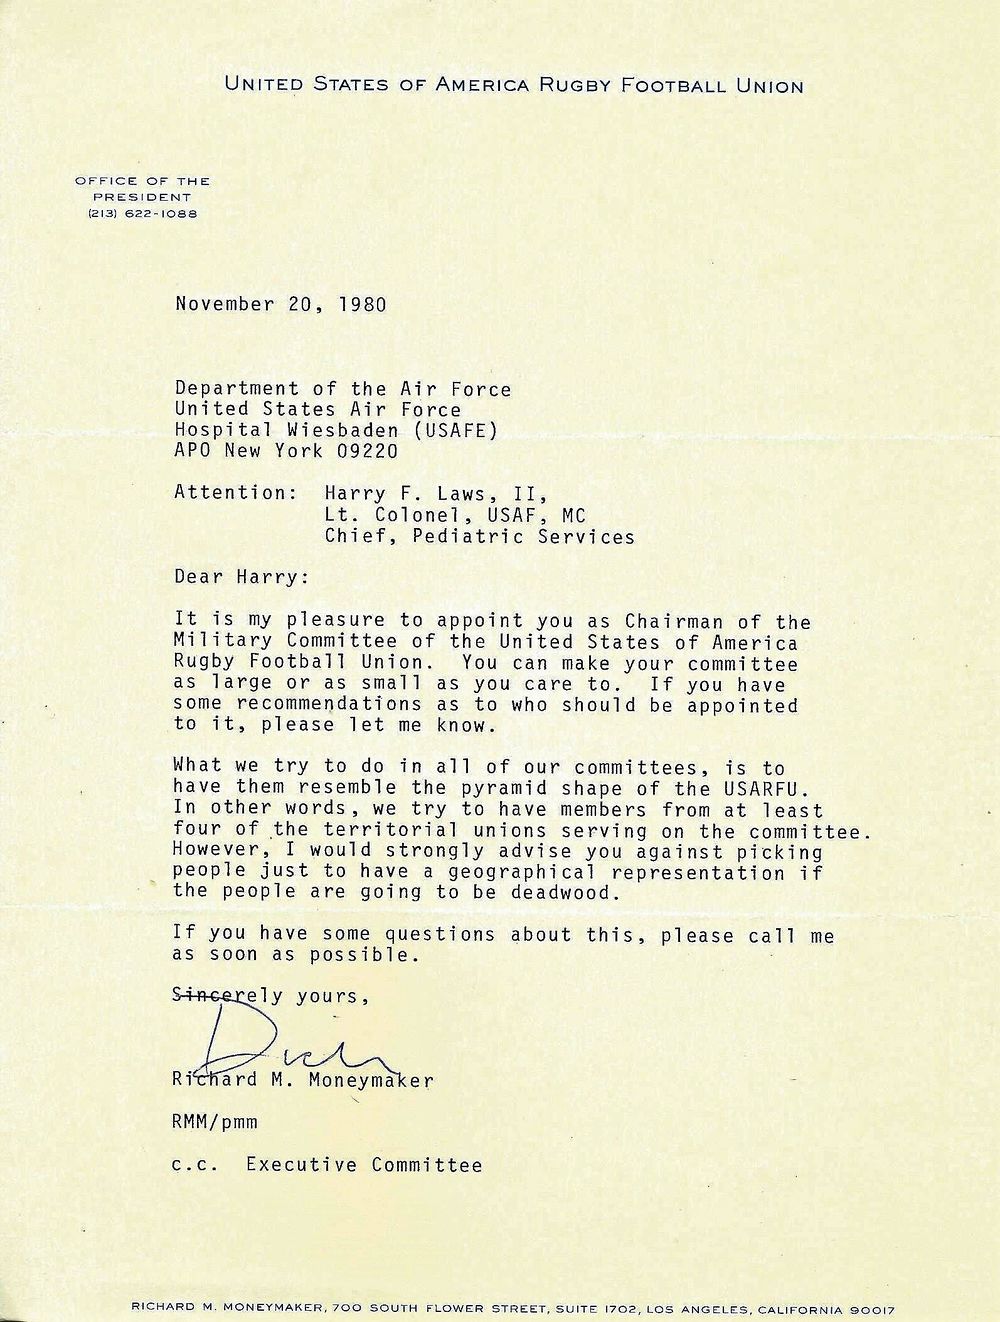 1980 appointment letter HLaws.jpg